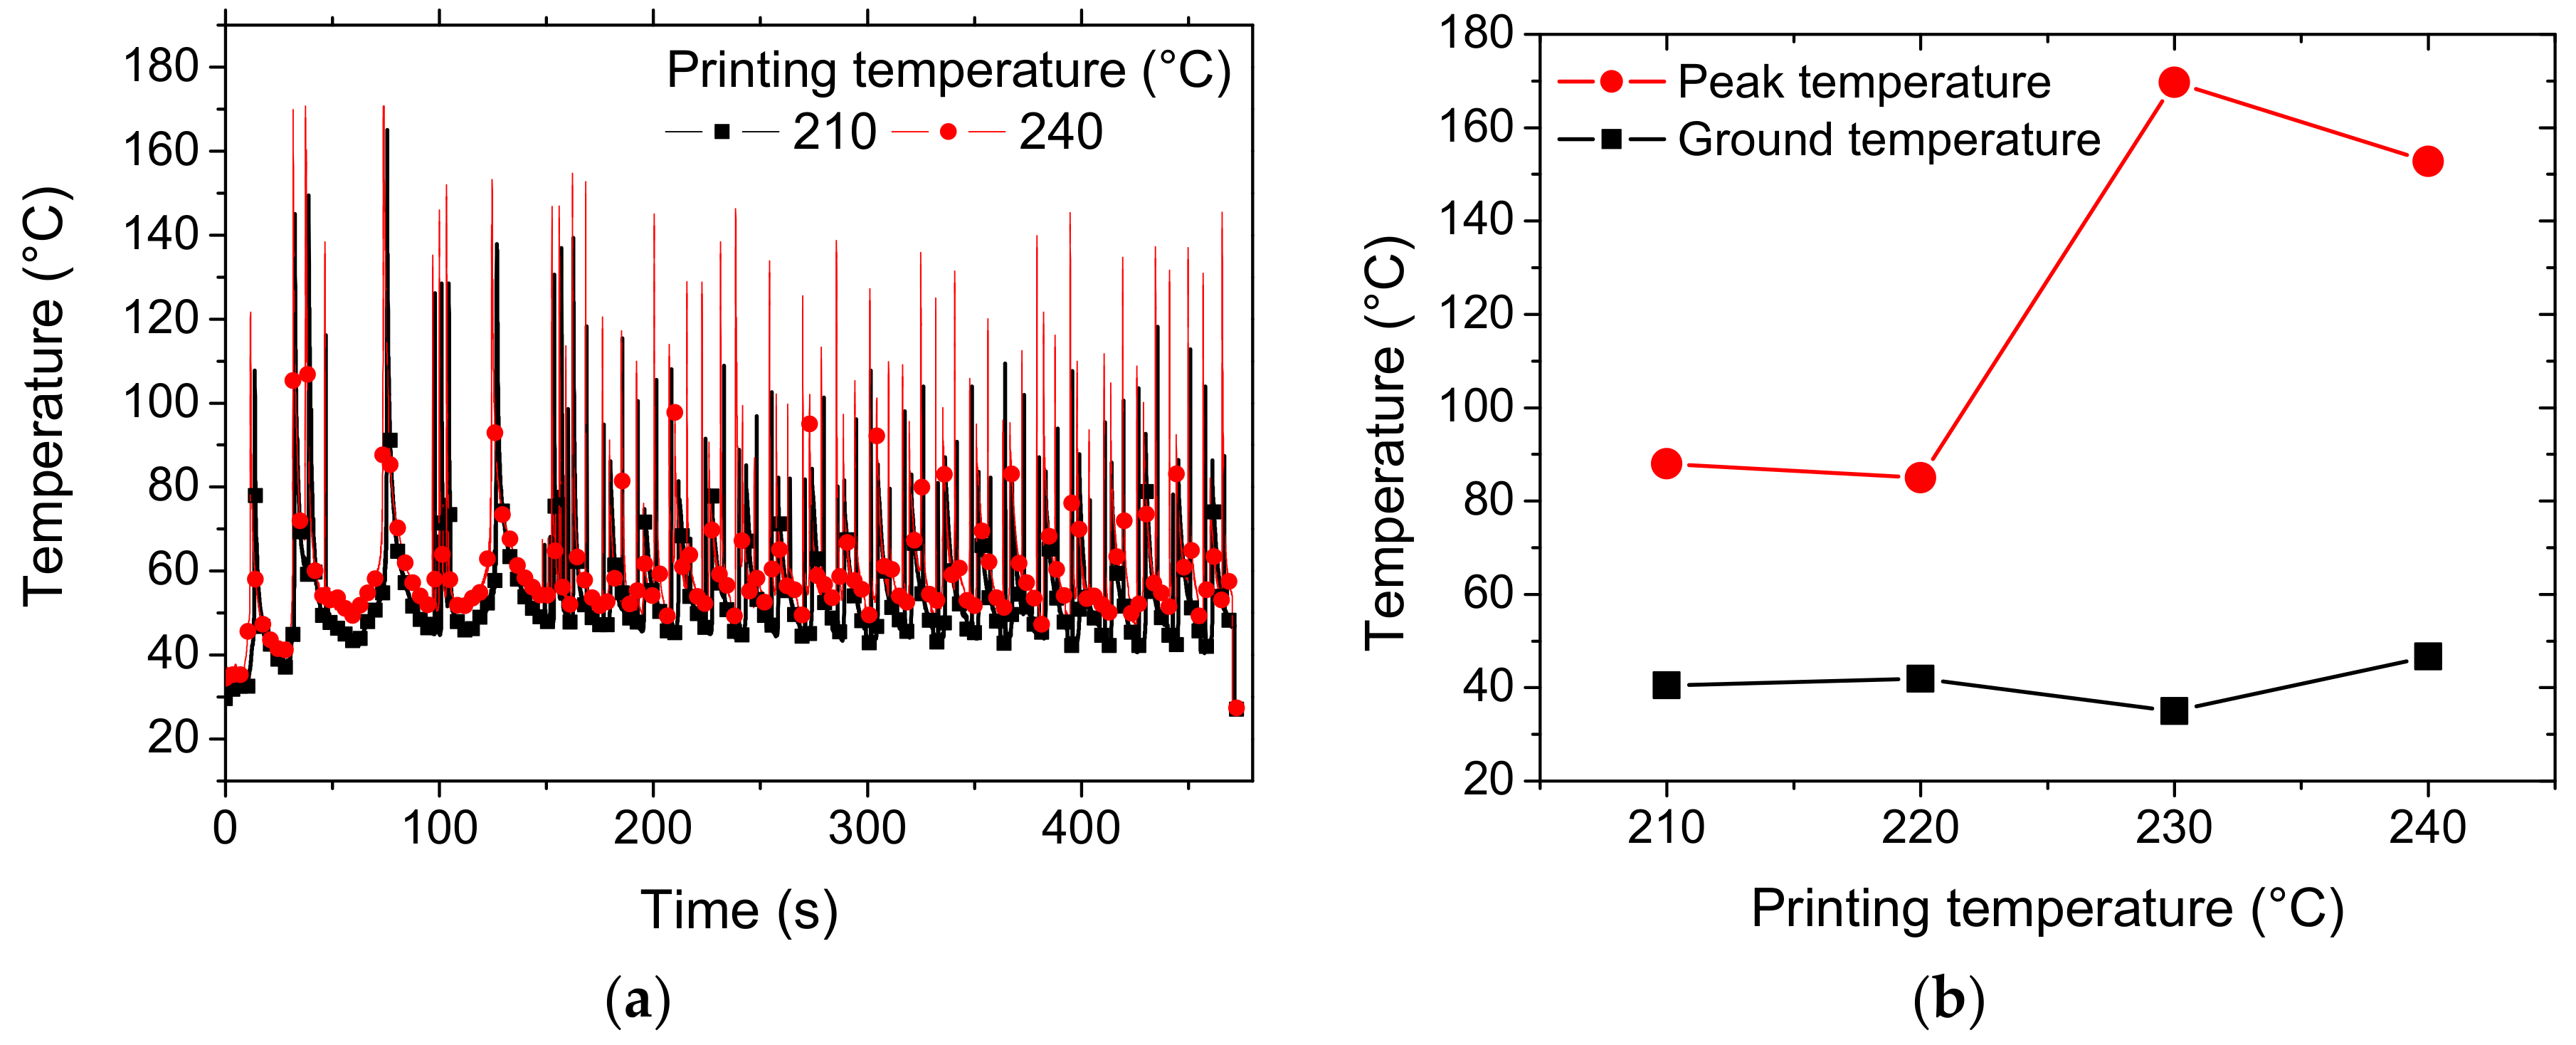 Polymers | Free Full-Text | Microstructure and Performance of 3D Printed Wood-PLA/PHA Using Fused Deposition Modelling: of Printing Temperature